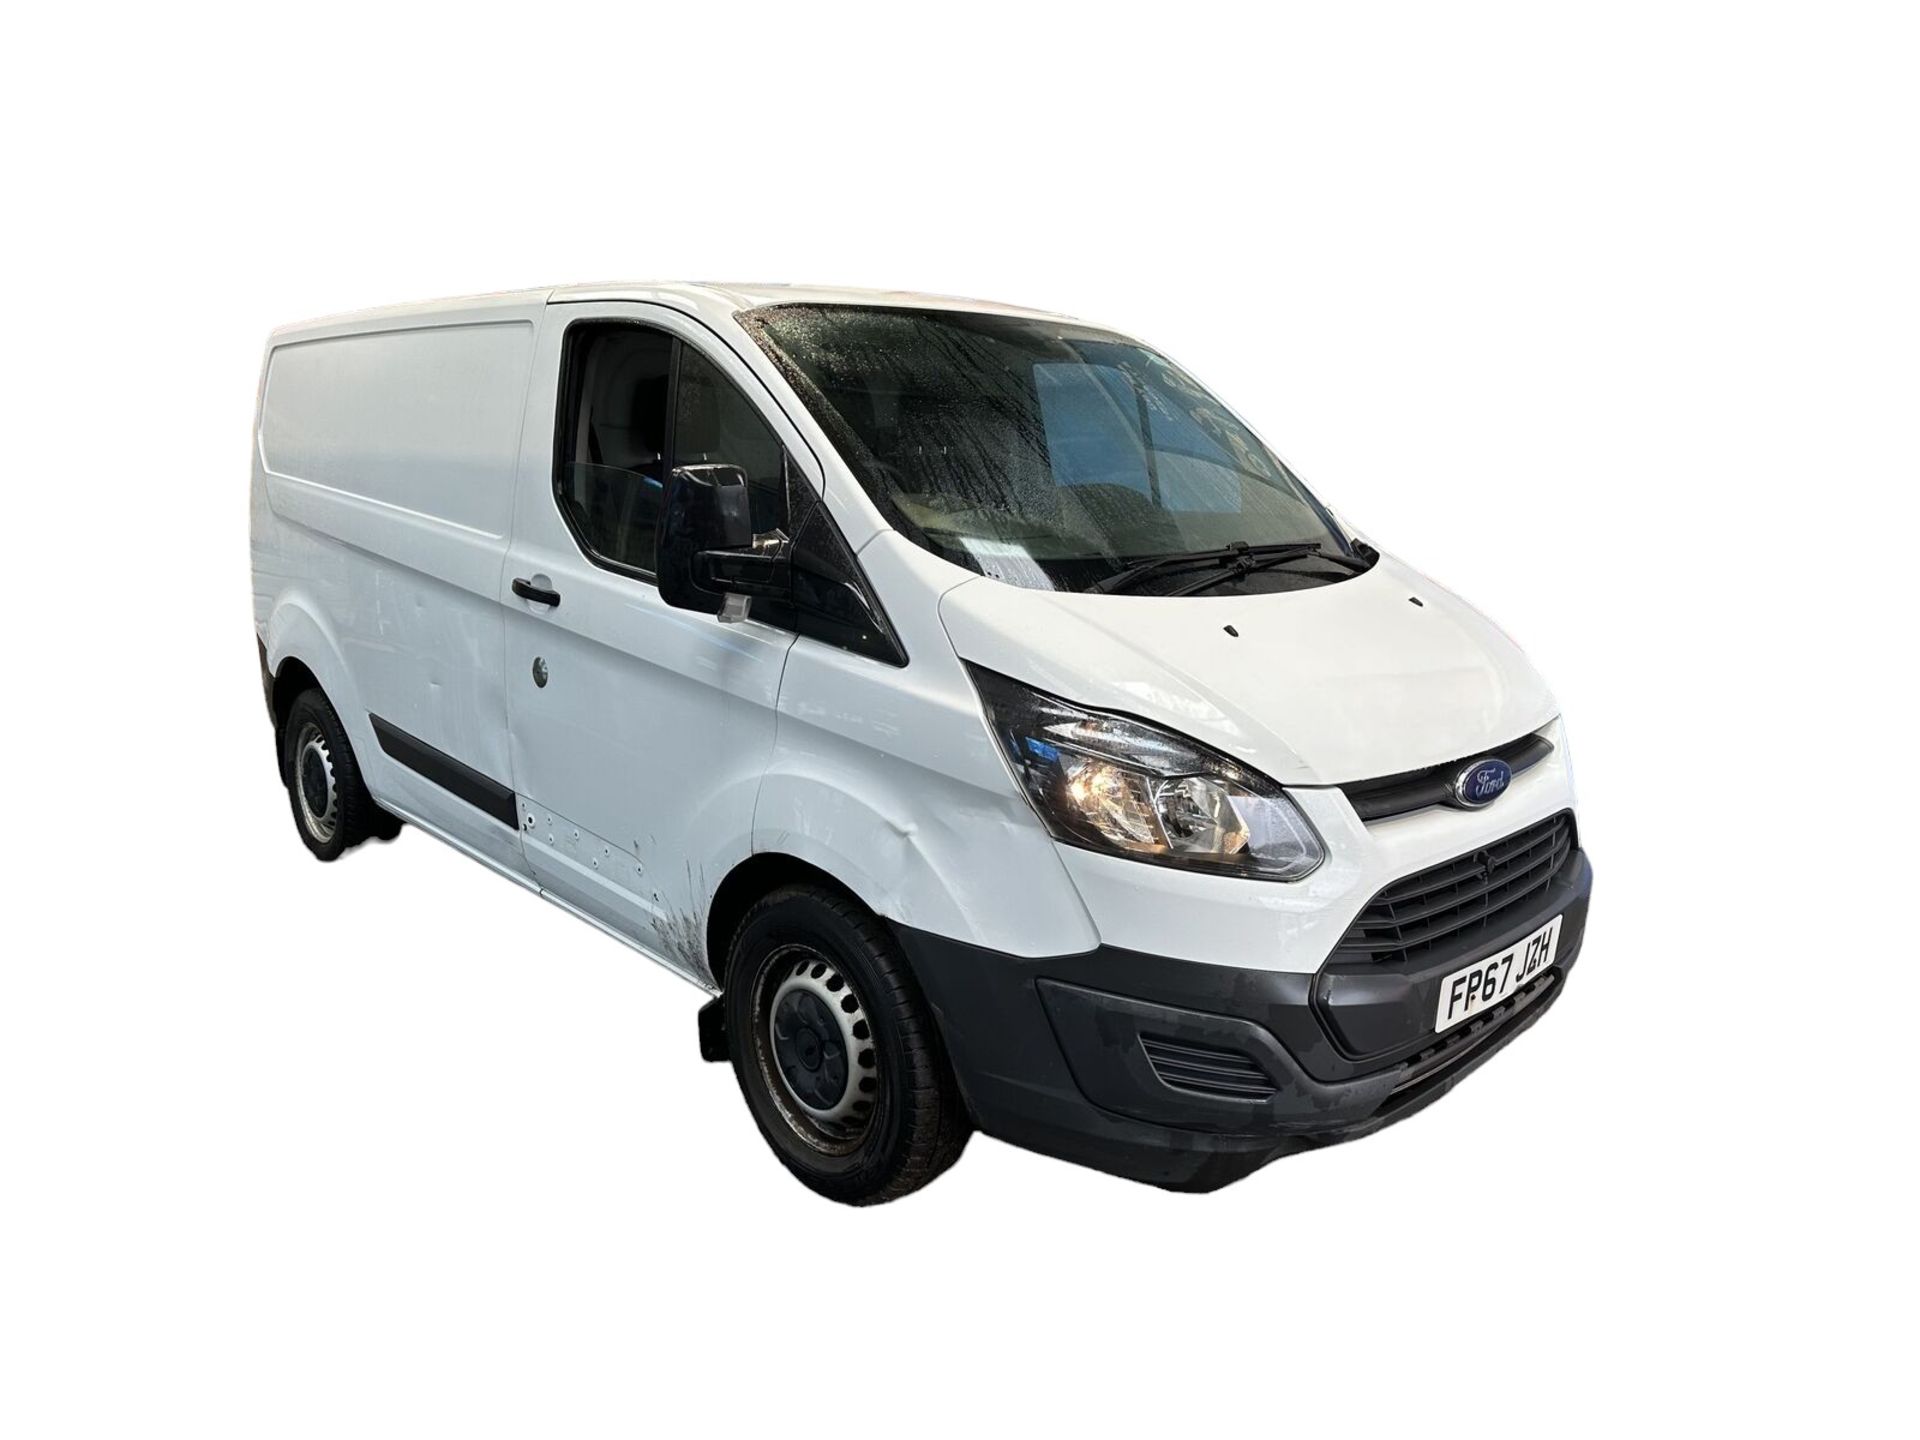 2018 FORD TRANSIT: RELIABLE WORKHORSE, EURO 6 COMPLIANCE